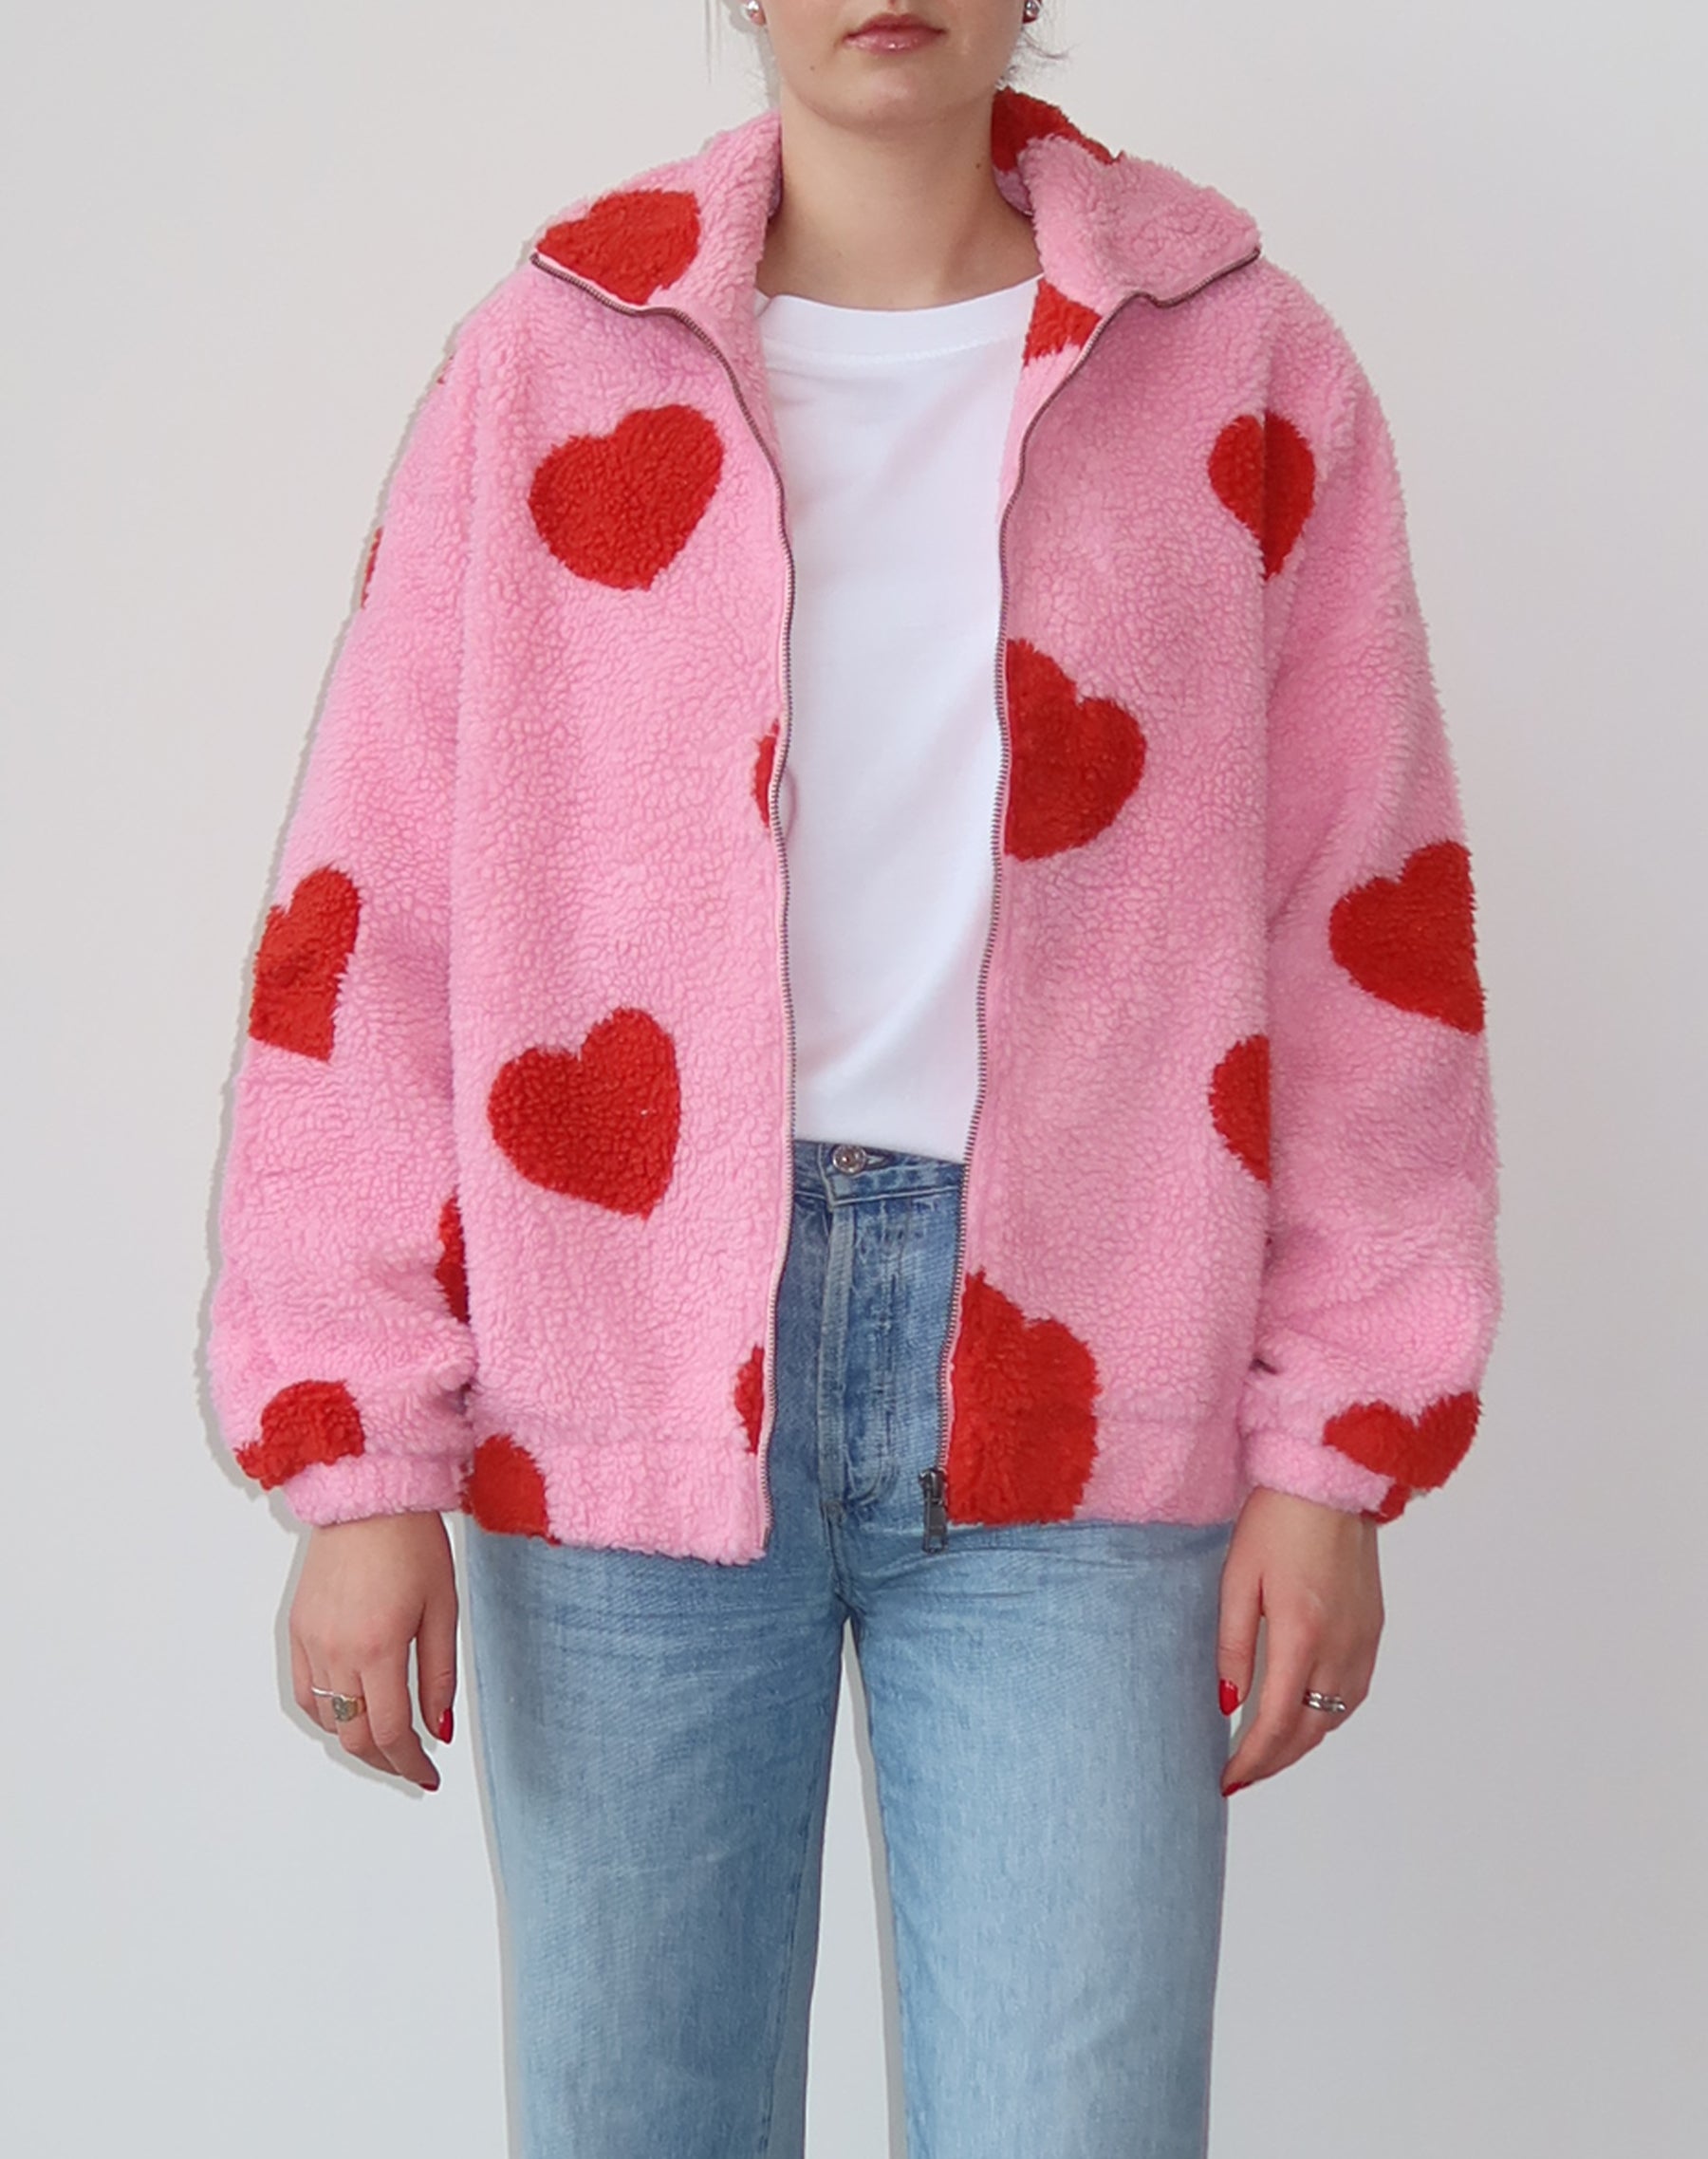 The "ALL OVER HEART" Sherpa Jacket | Baby Pink & Red